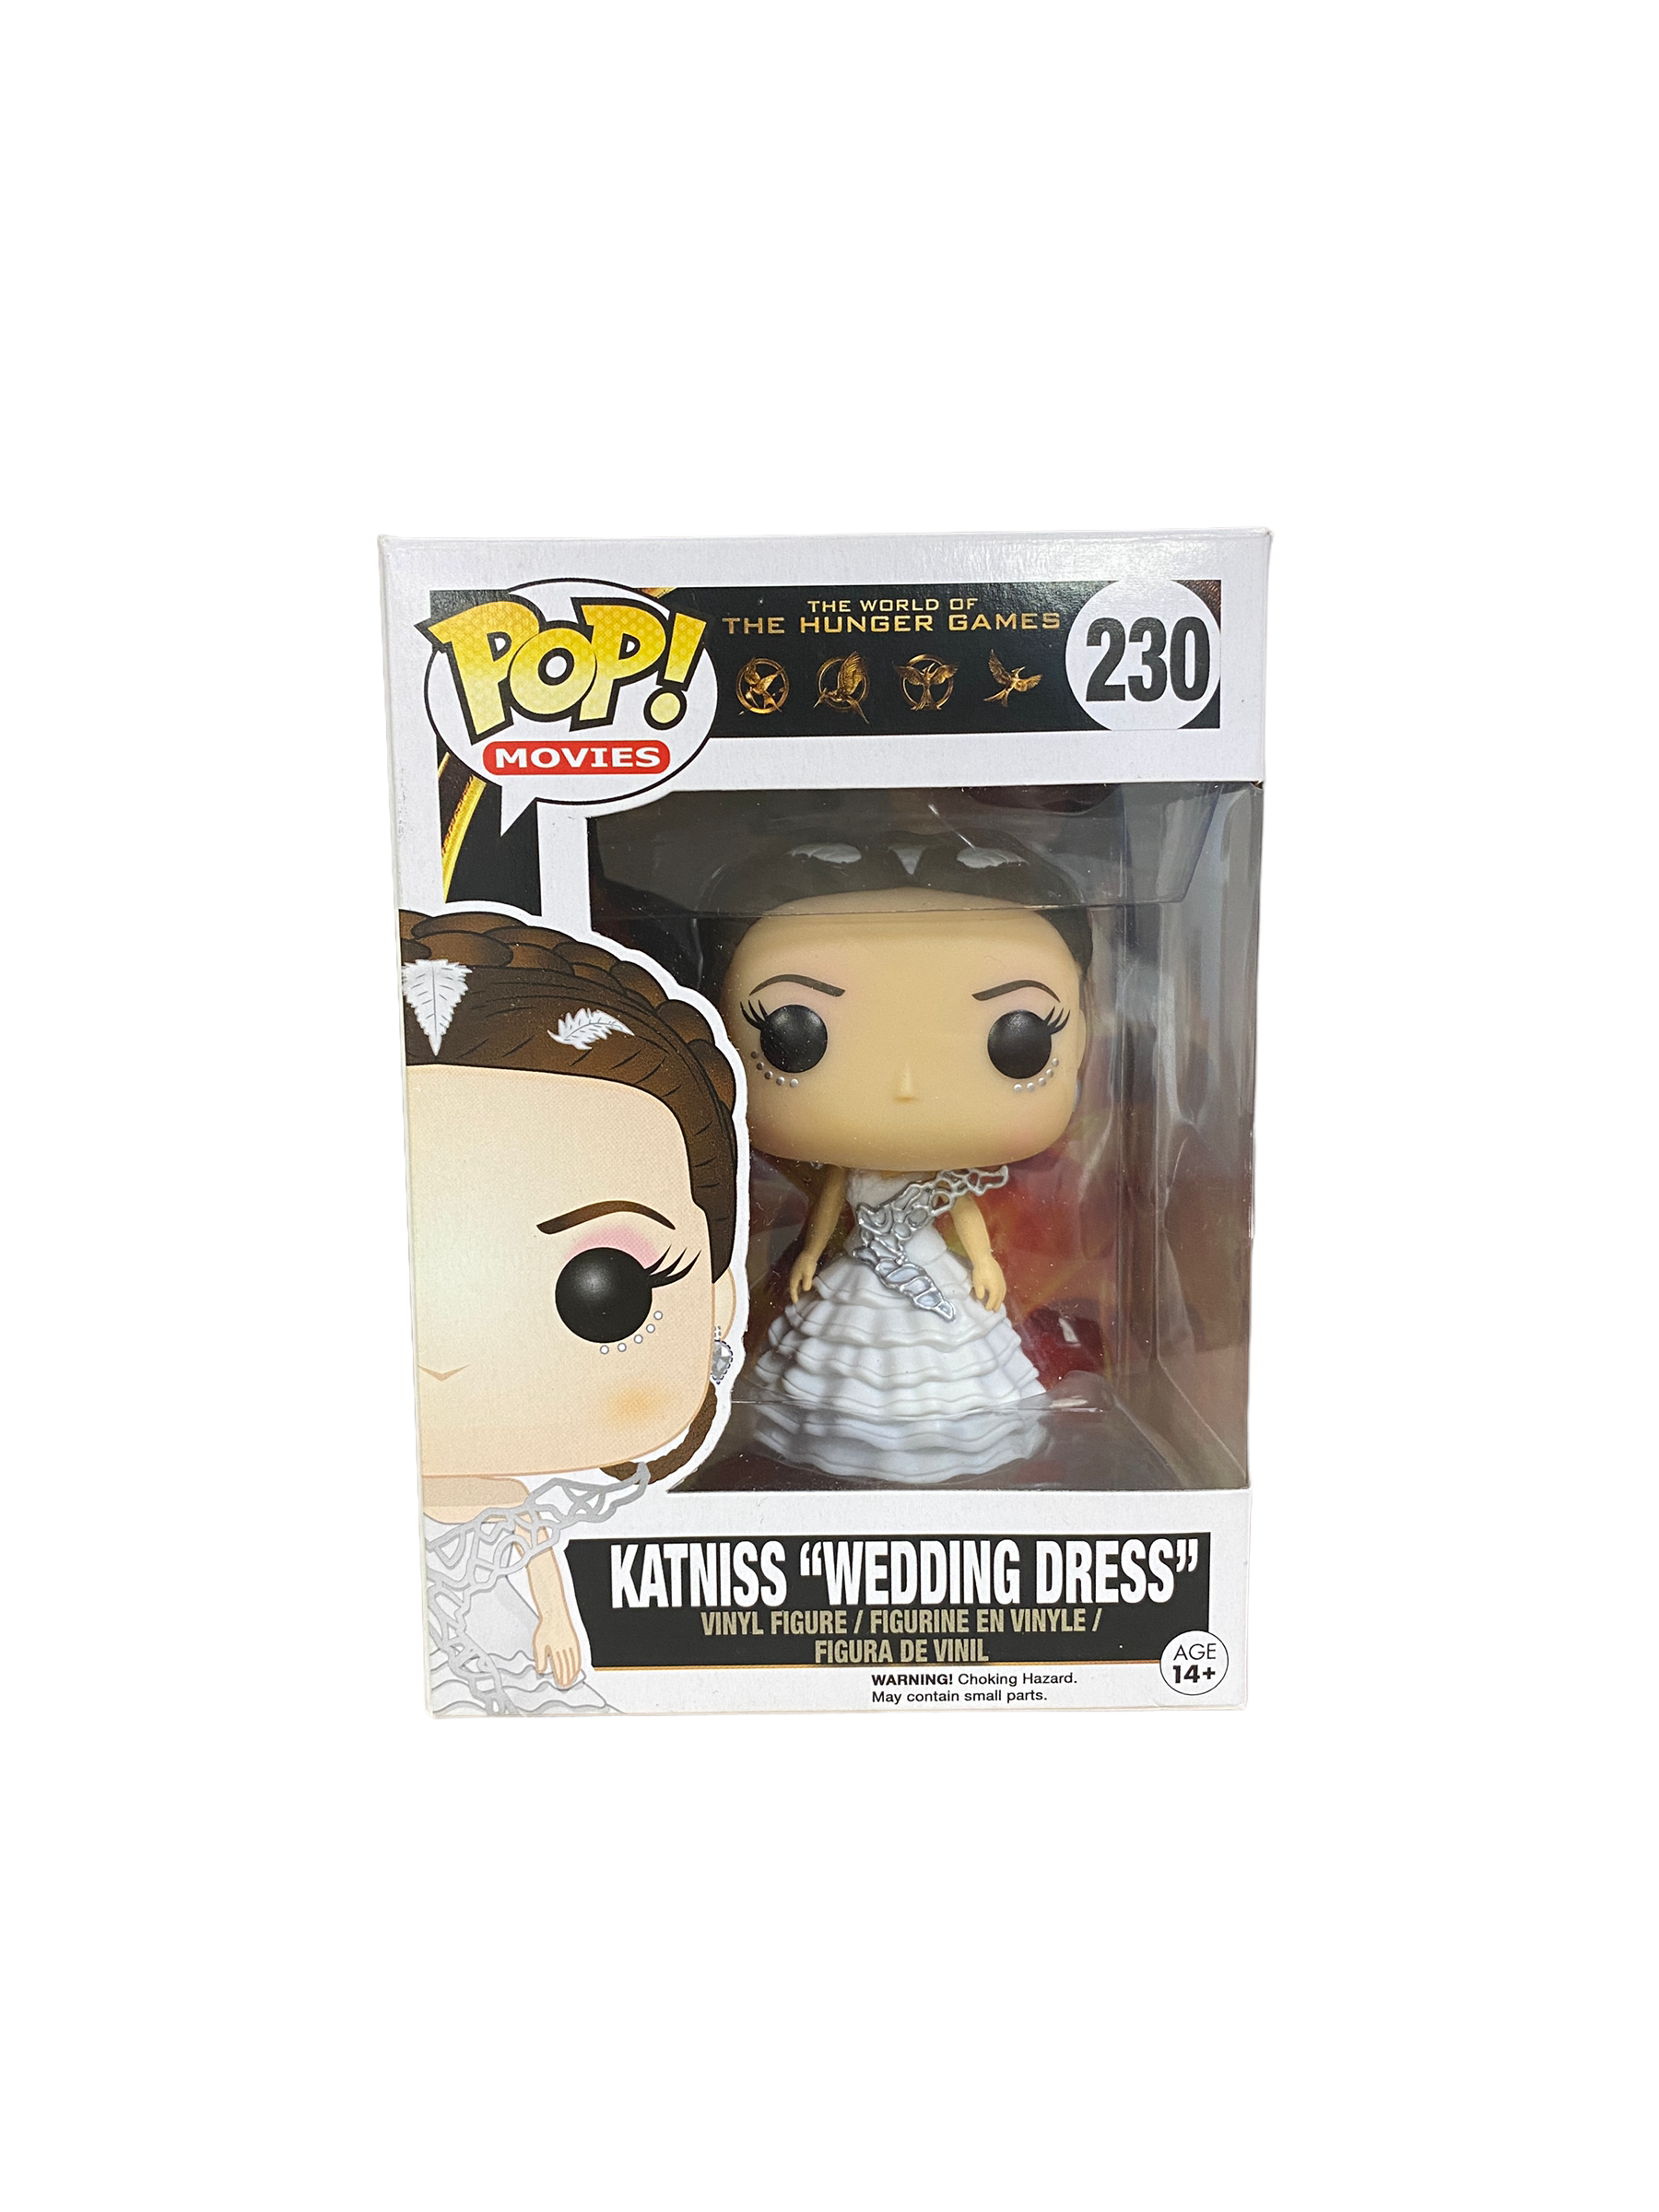 Katniss "Wedding Dress" #230 Funko Pop! - The World Of The Hunger Games - 2015 Pop! - Condition 7/10